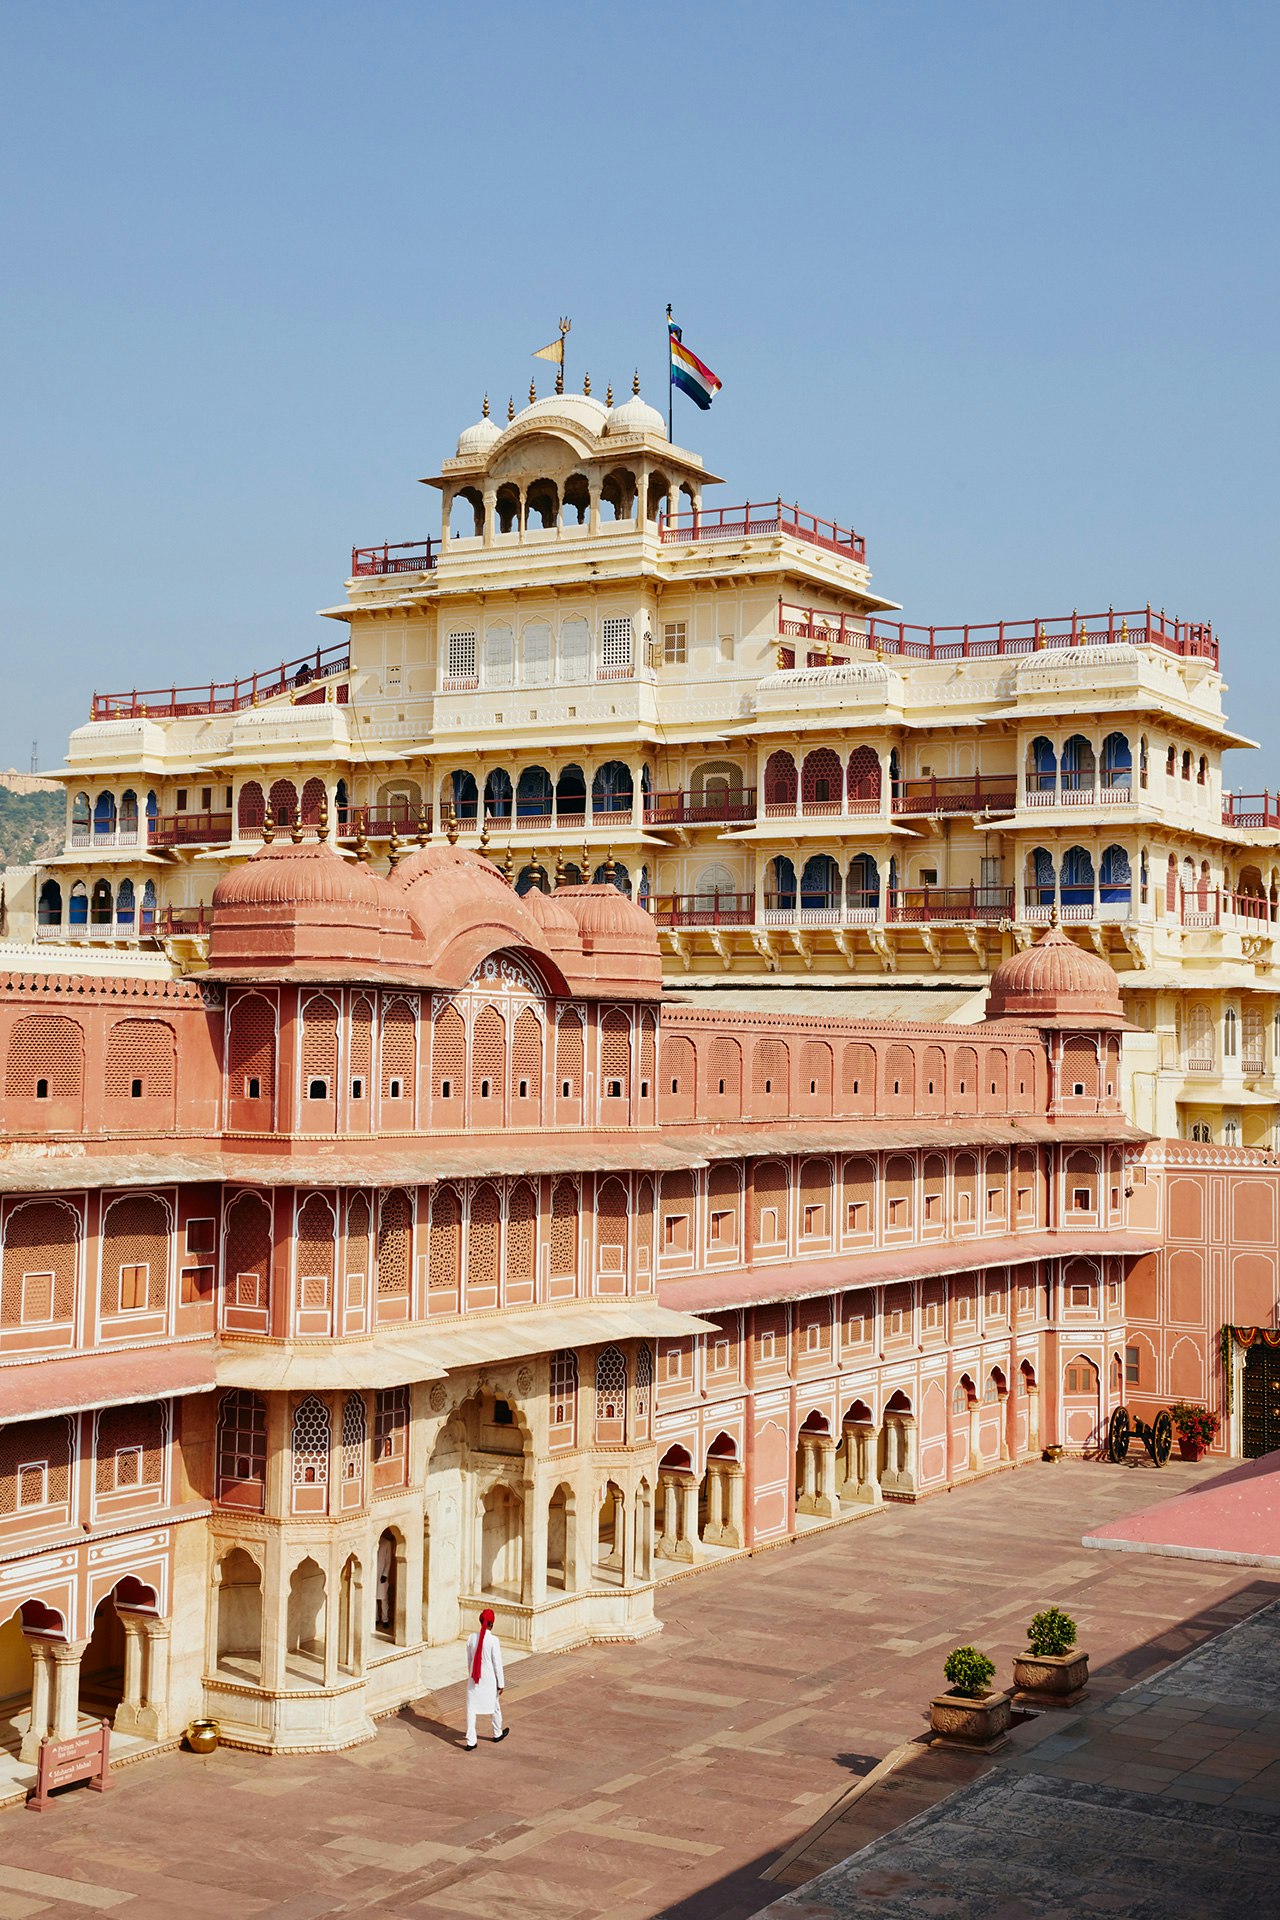 The exterior of the City of Jaipur palace